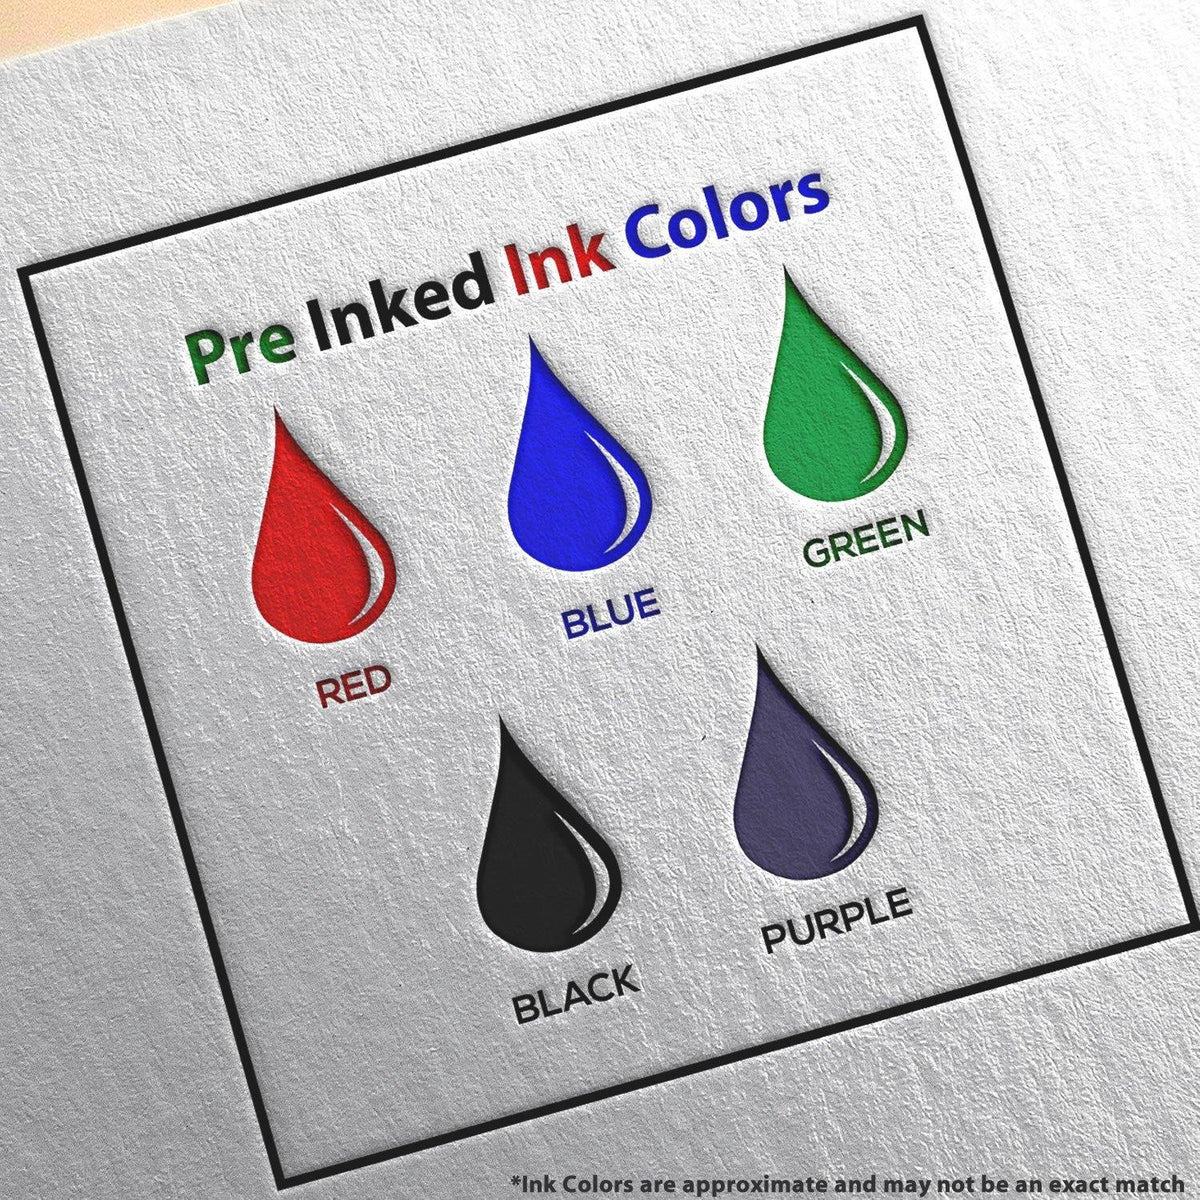 Slim Pre-Inked Received with Date Box Stamp Ink Color Options